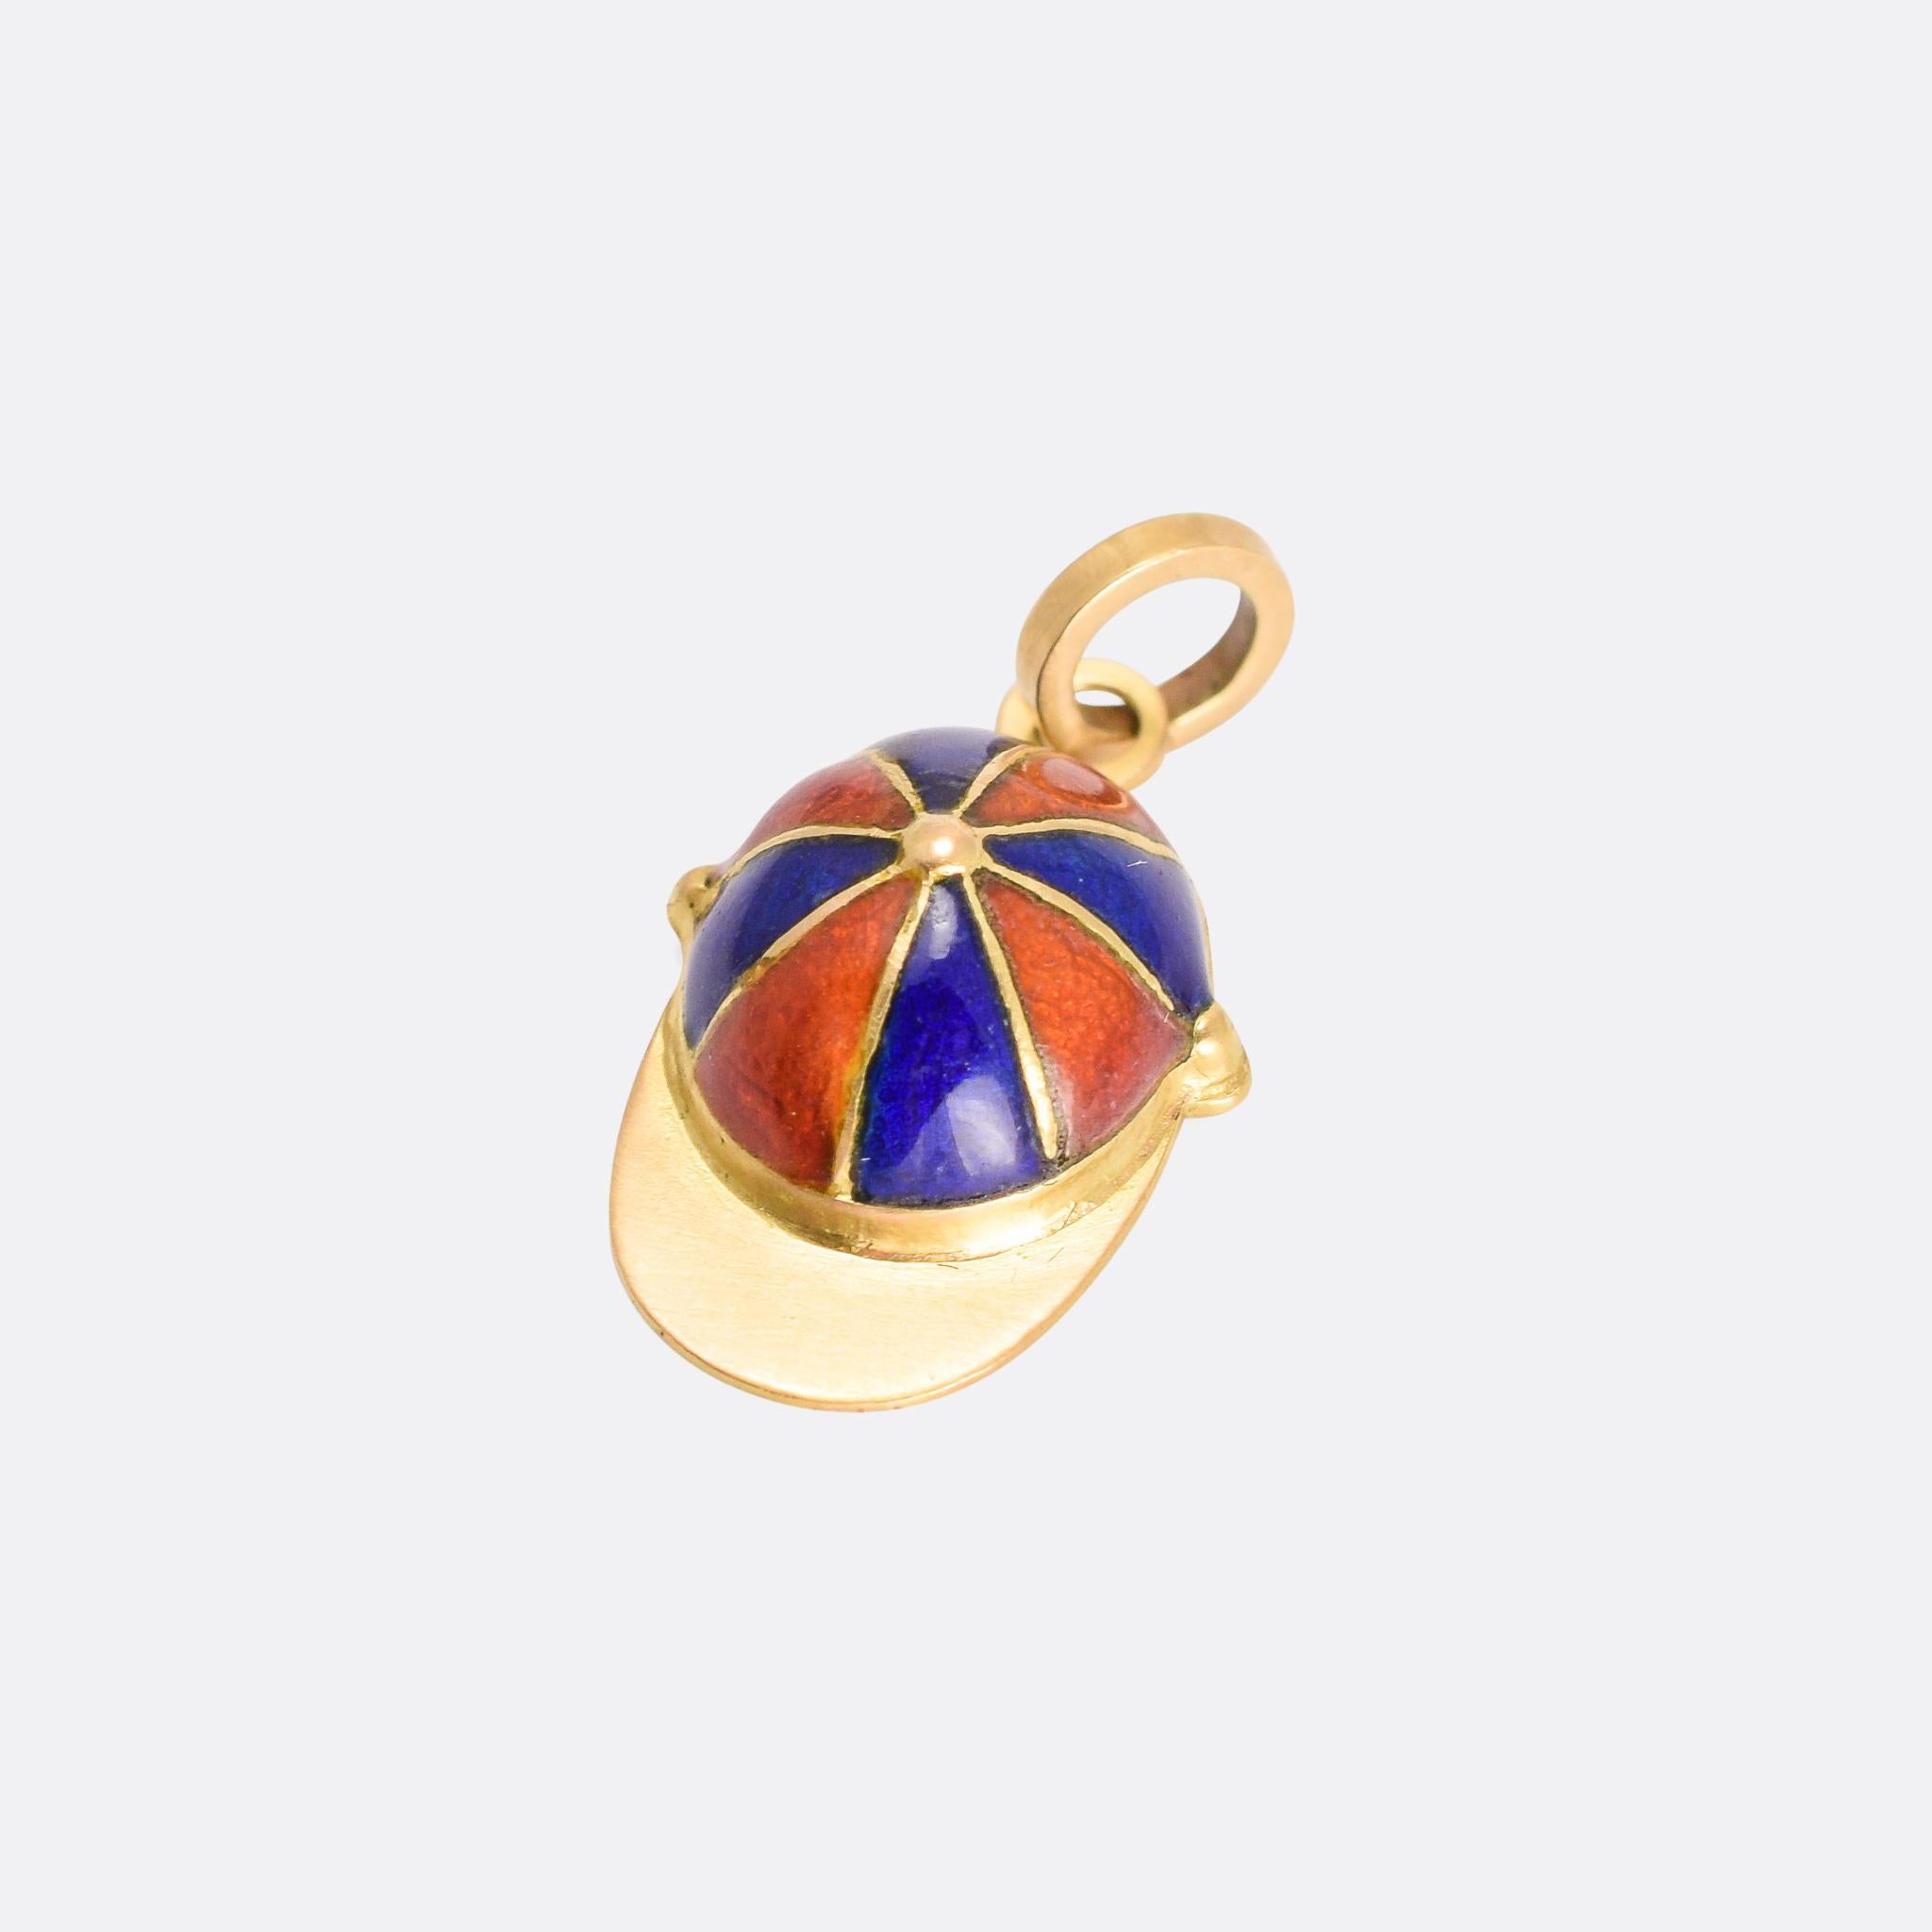 An especially good quality Victorian charm pendant modelled as a jockey's cap. It's crafted in 18k yellow gold and finished in orange and blue enamel - dating from the late 19th Century, circa 1890.

MEASUREMENTS 
18.6 x 11.8mm (not including